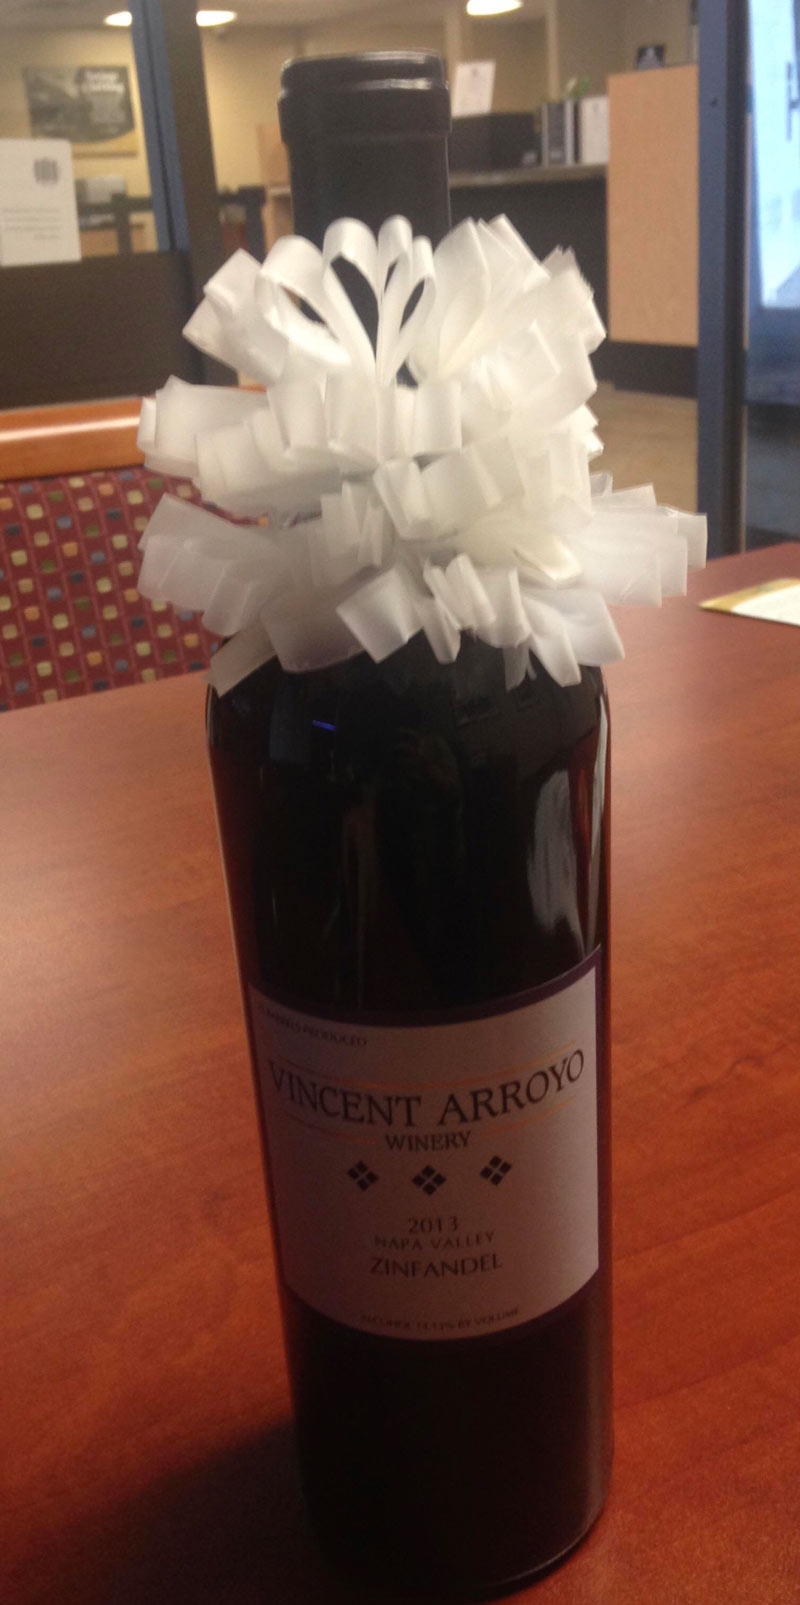 My boss hates scotch tape and loves wine. This was my retirement gift for him